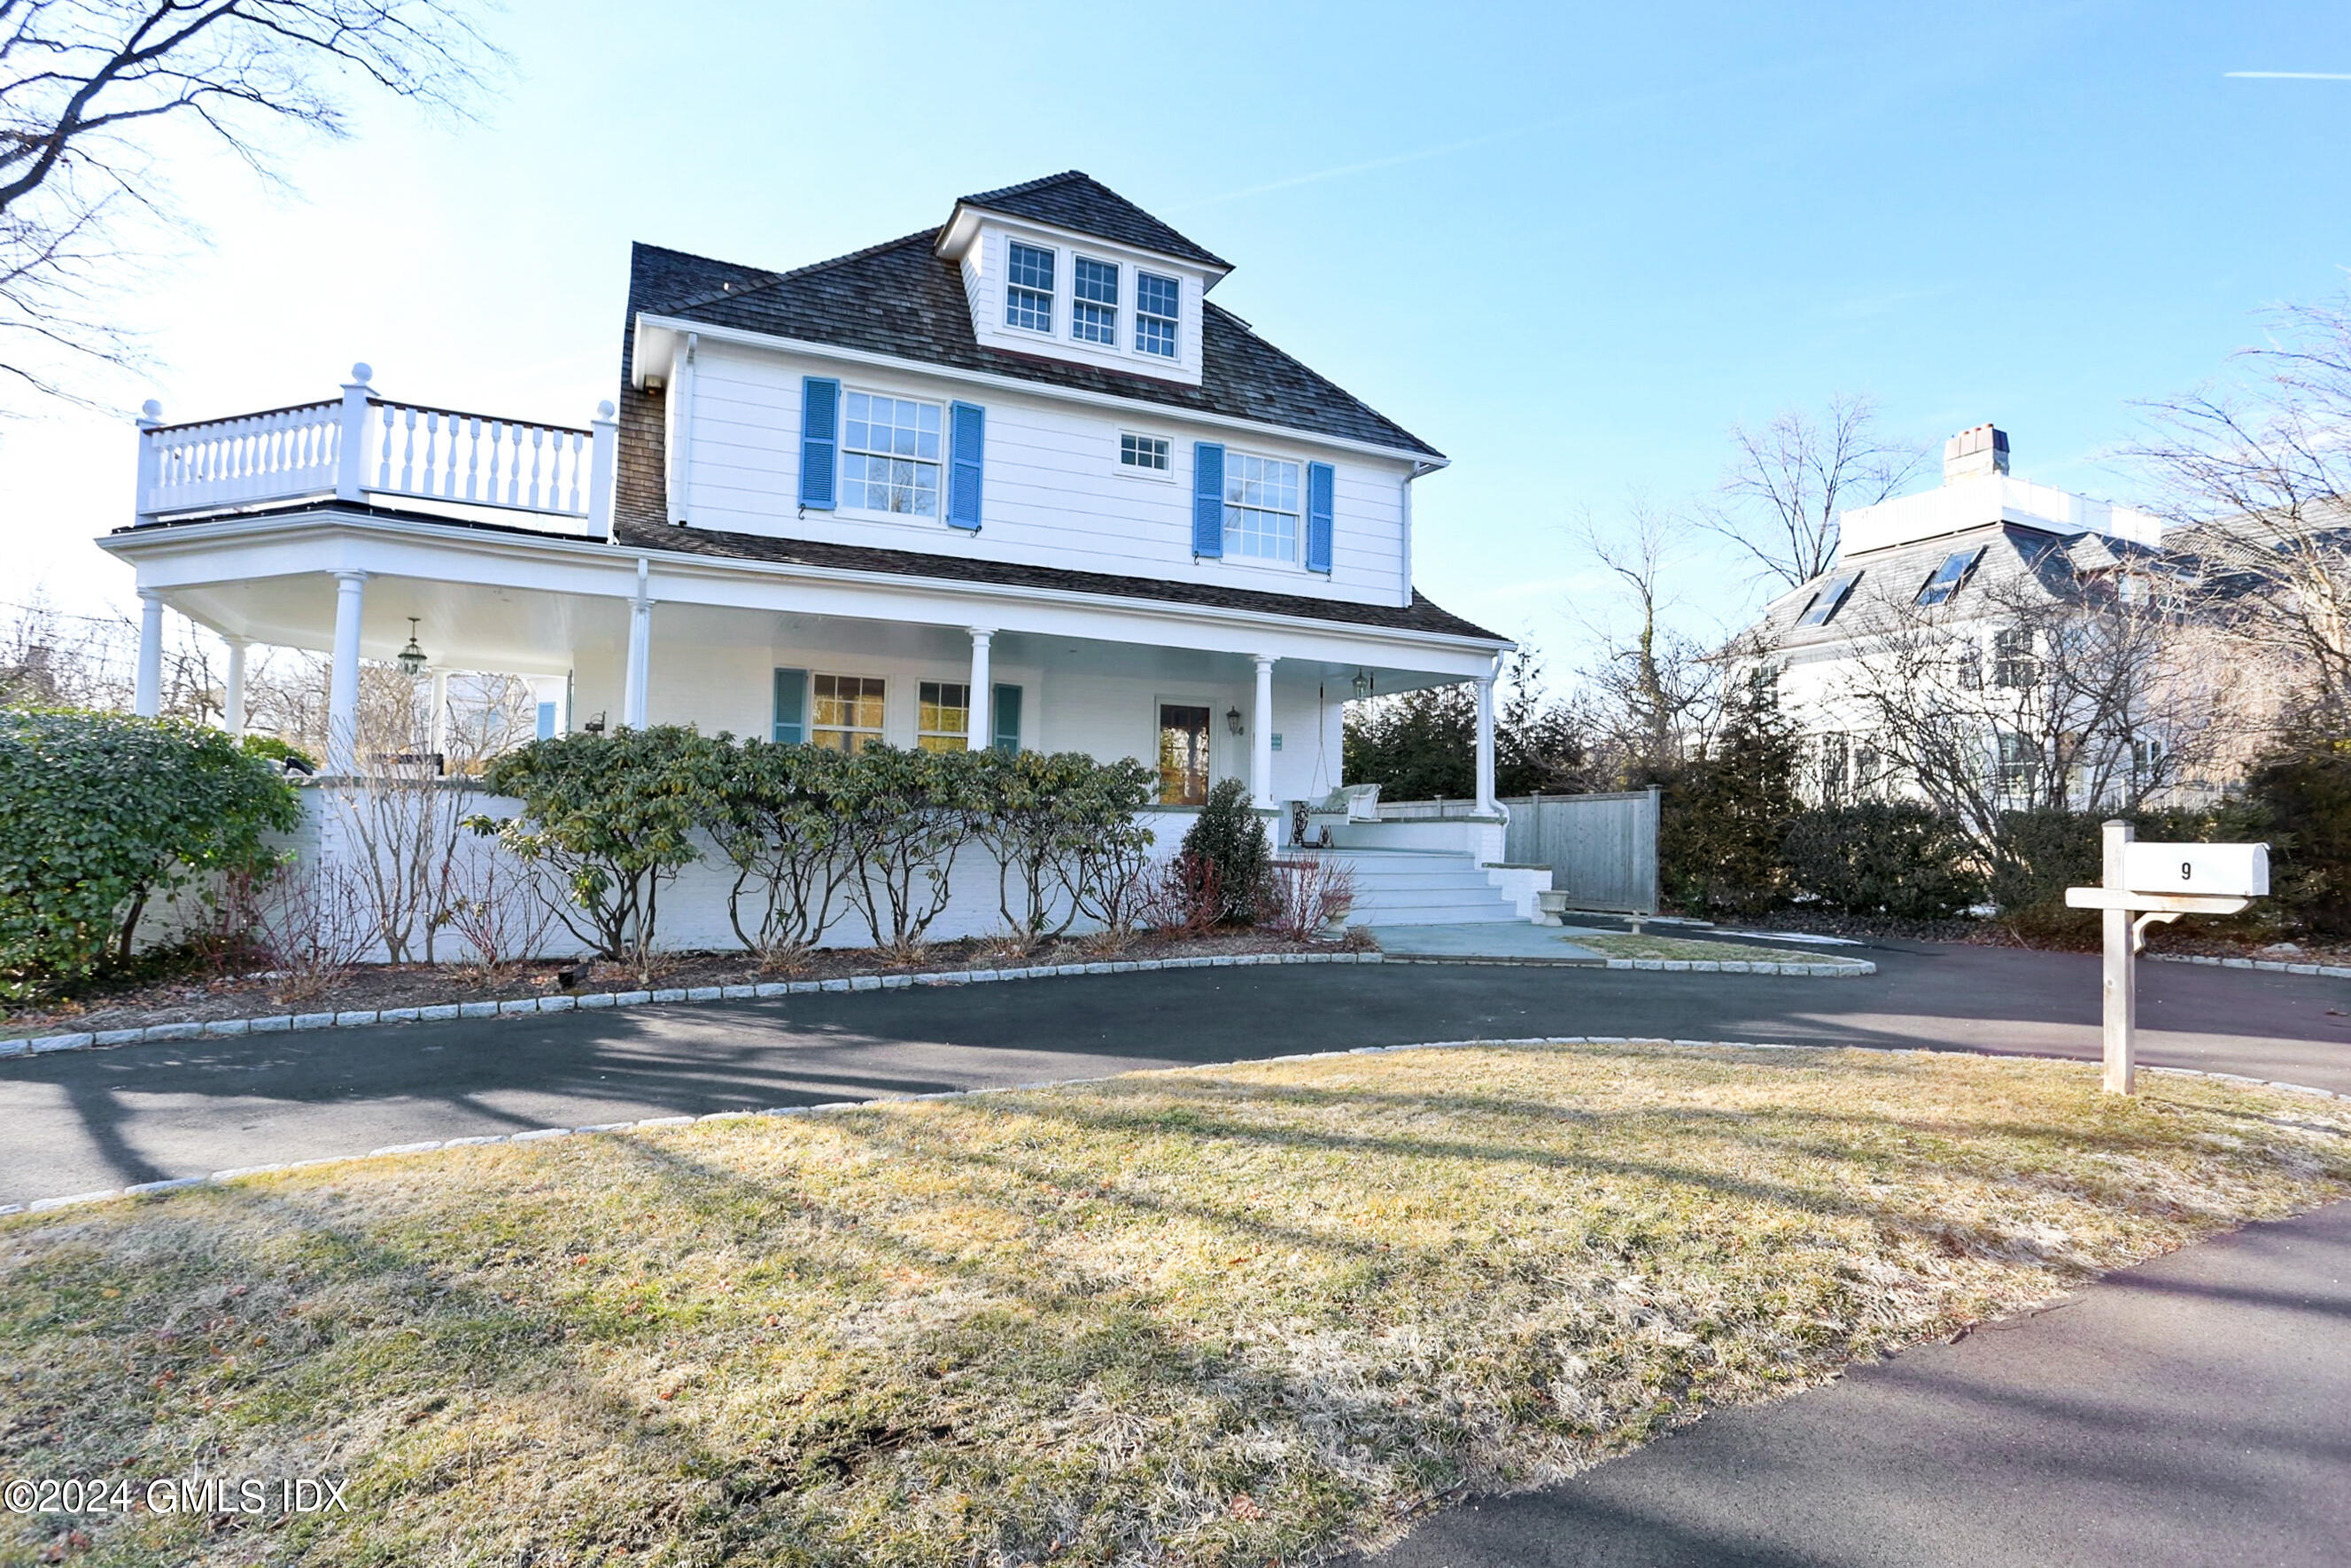 9 Middle Way, Old Greenwich, Connecticut - 5 Bedrooms  
5 Bathrooms - 